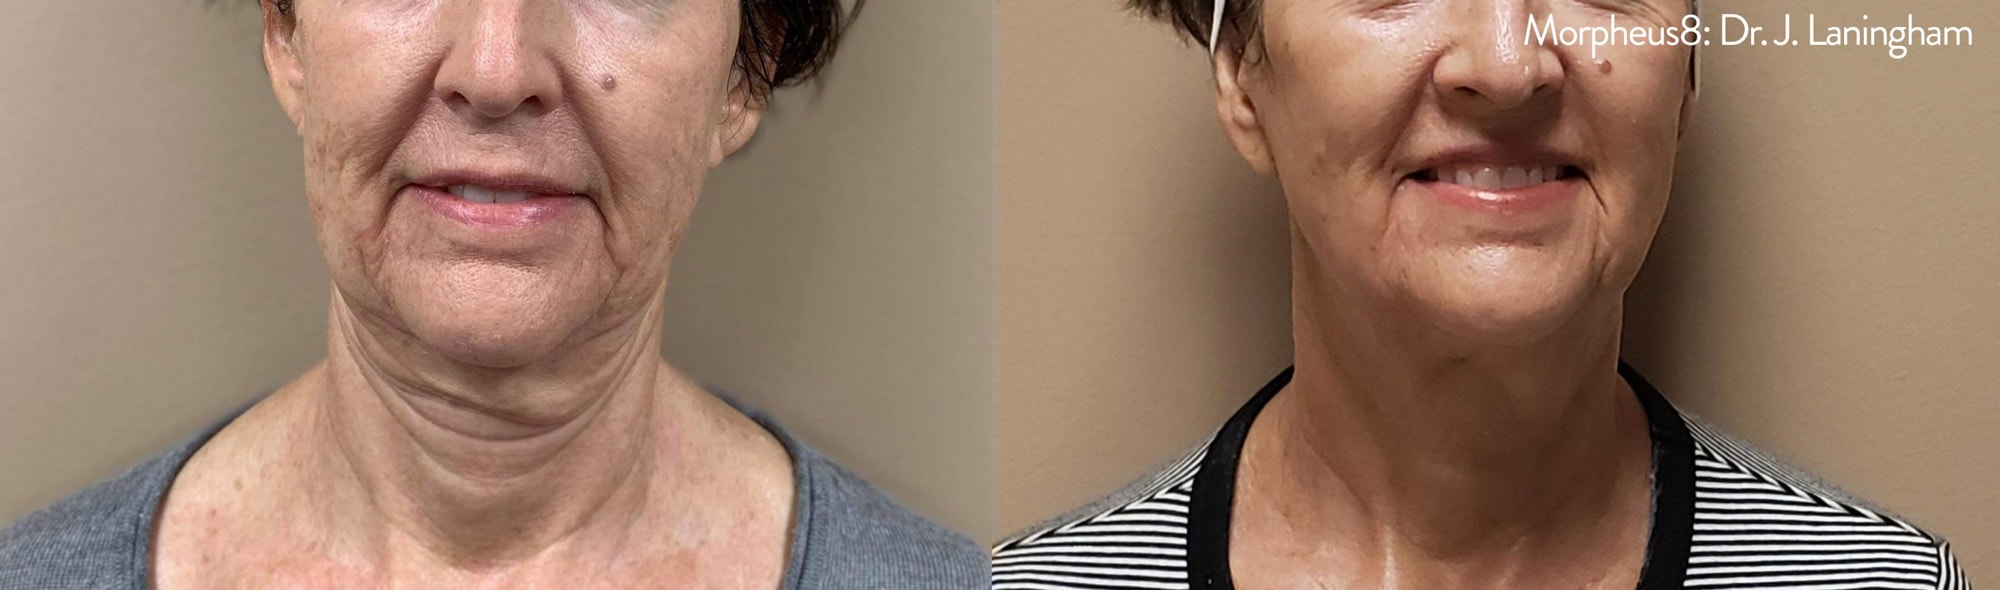 Before and After photos of Morpheus8 tightening loose skin and eliminating deep wrinkles around a woman’s neck and chin